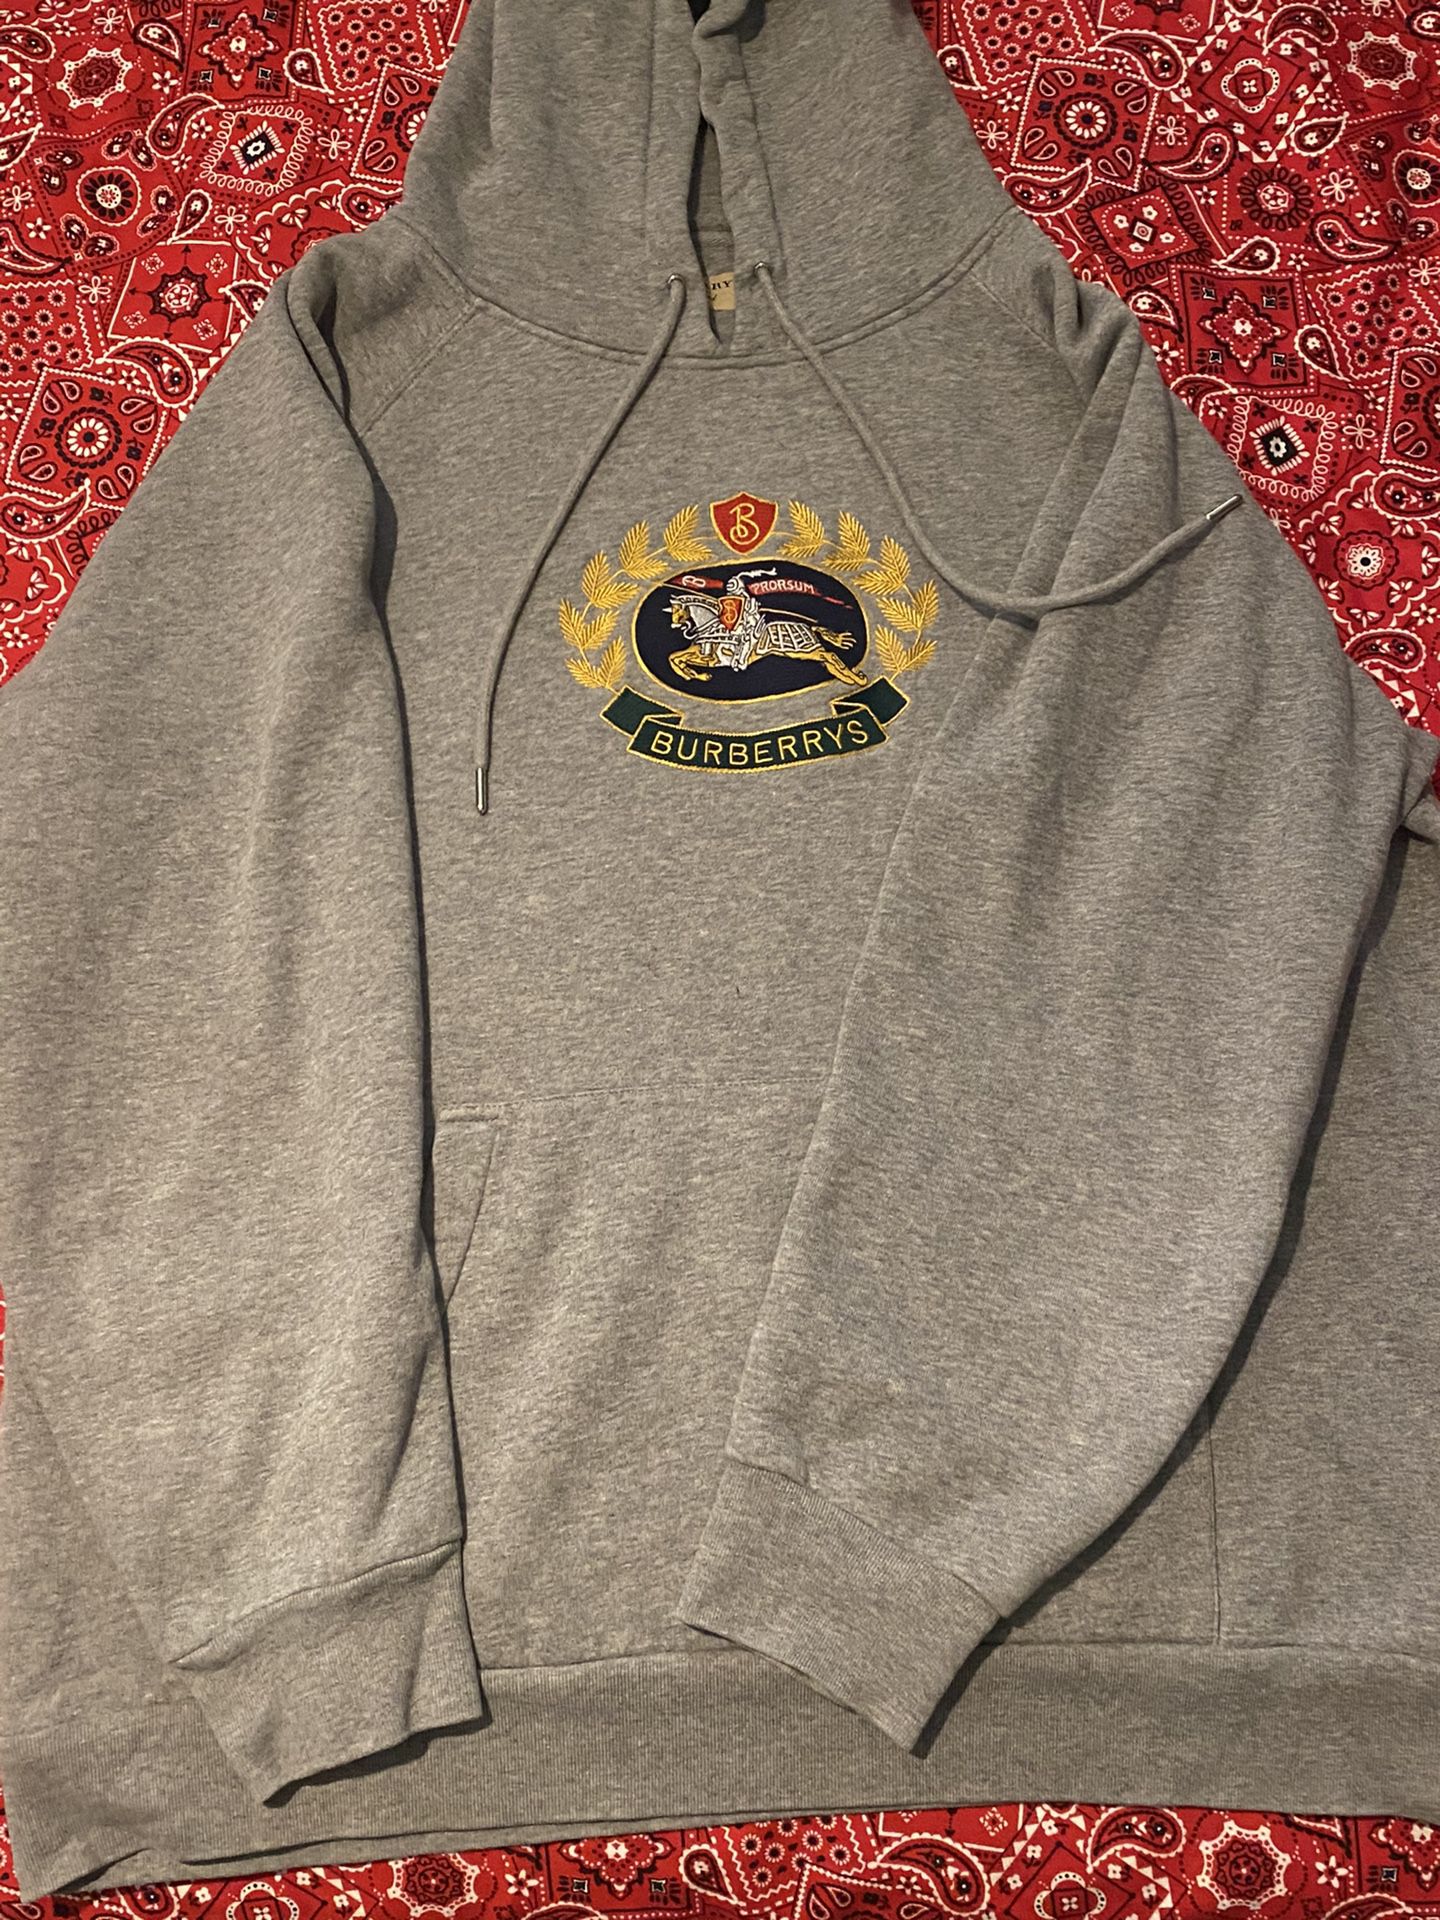 Burberry Embroidered Hoodie Size Medium